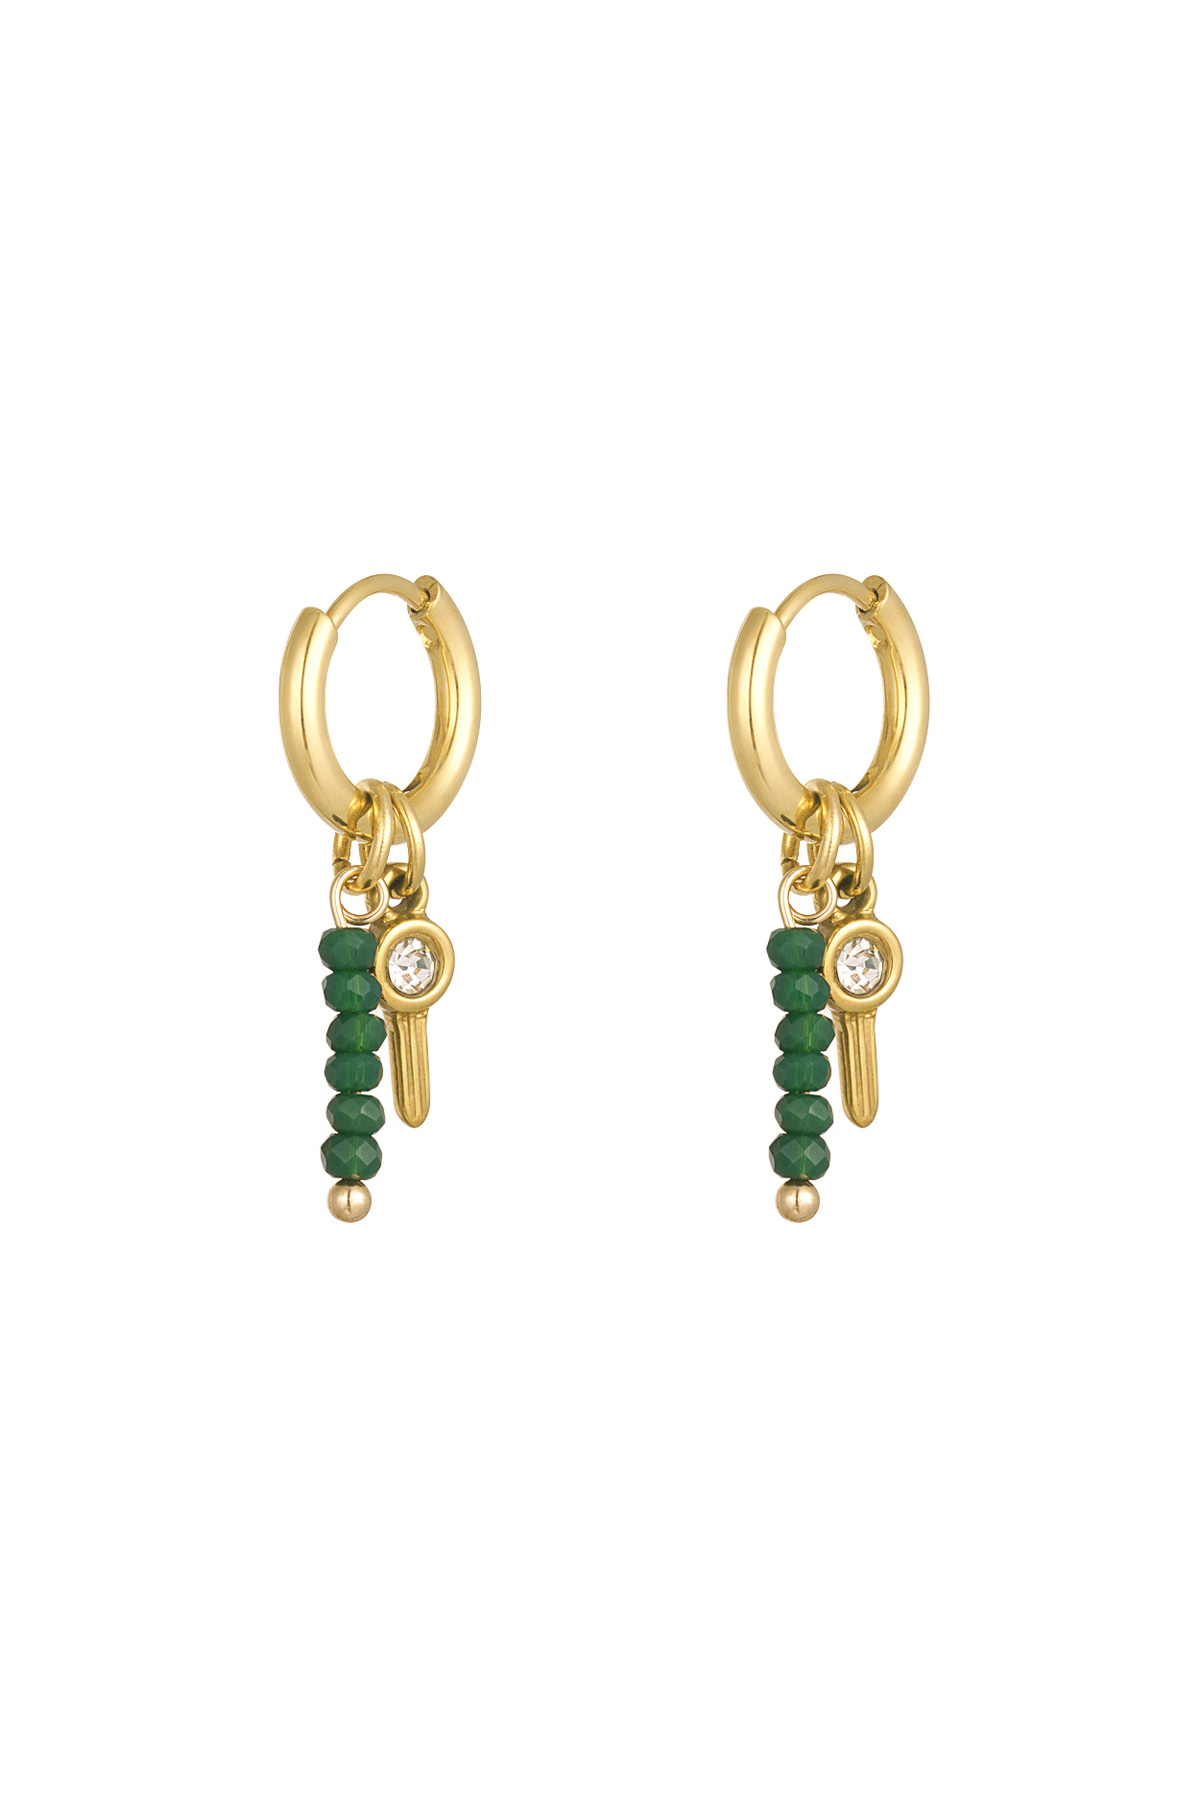 Earrings beads with charm - gold/green